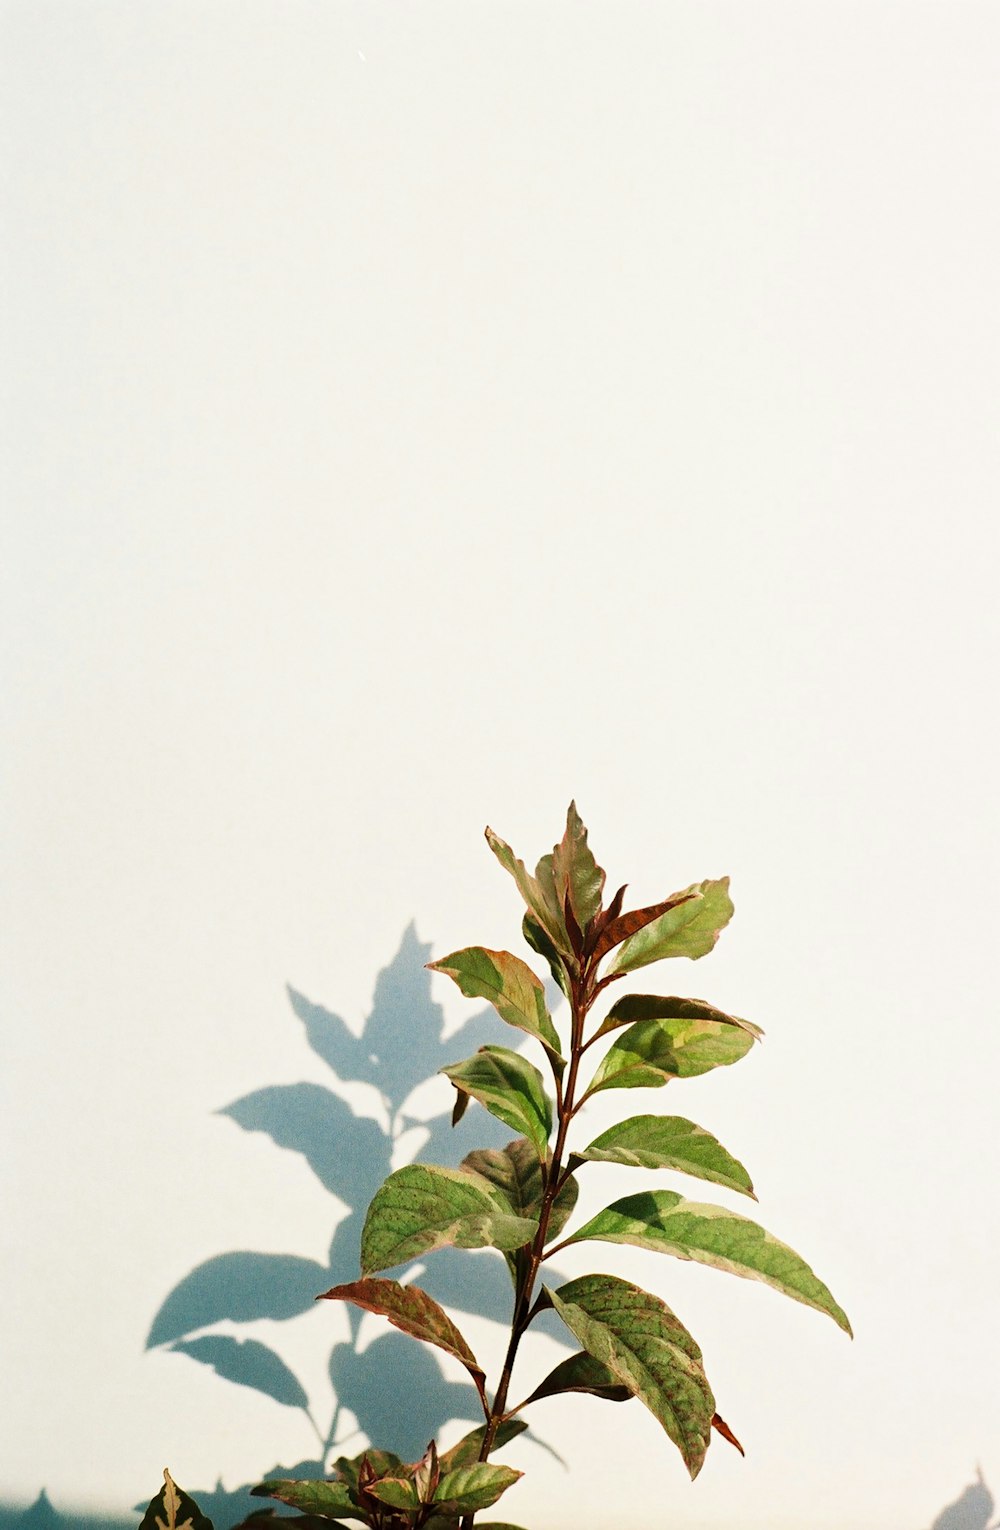 green leafed plant near white wall